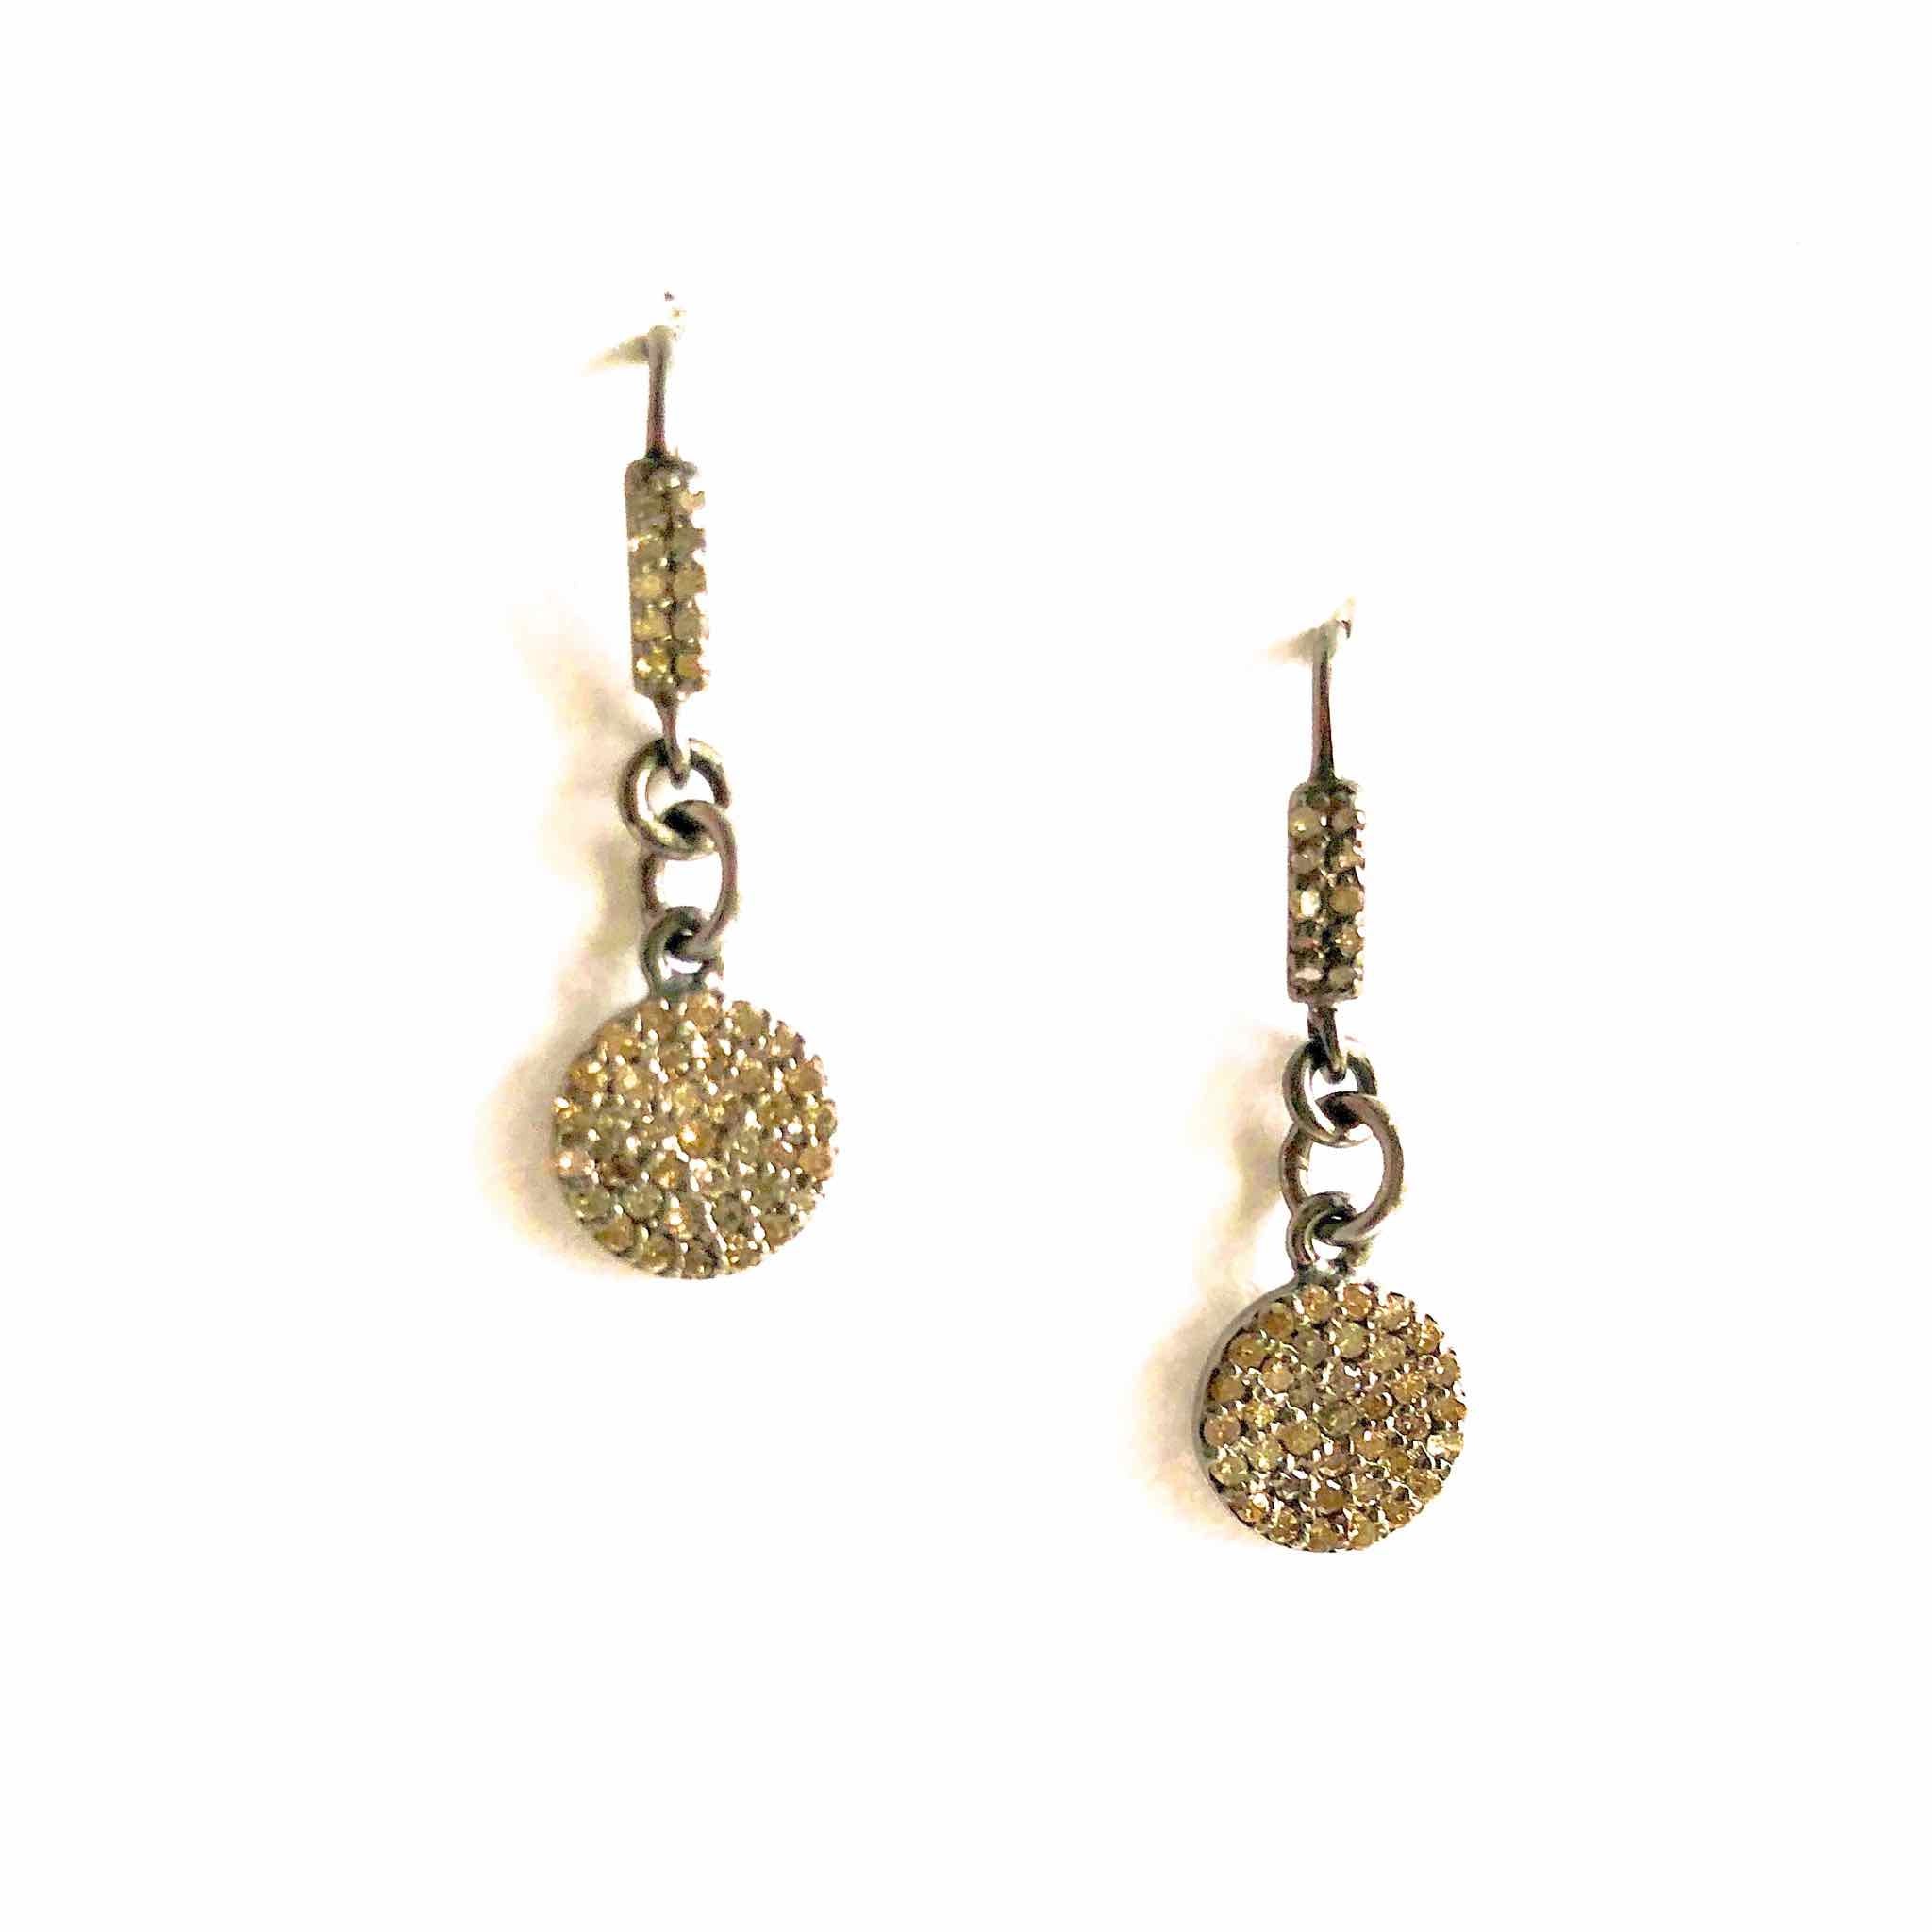 Old World Diamond Accent Drop Earrings with Oxidized Silver